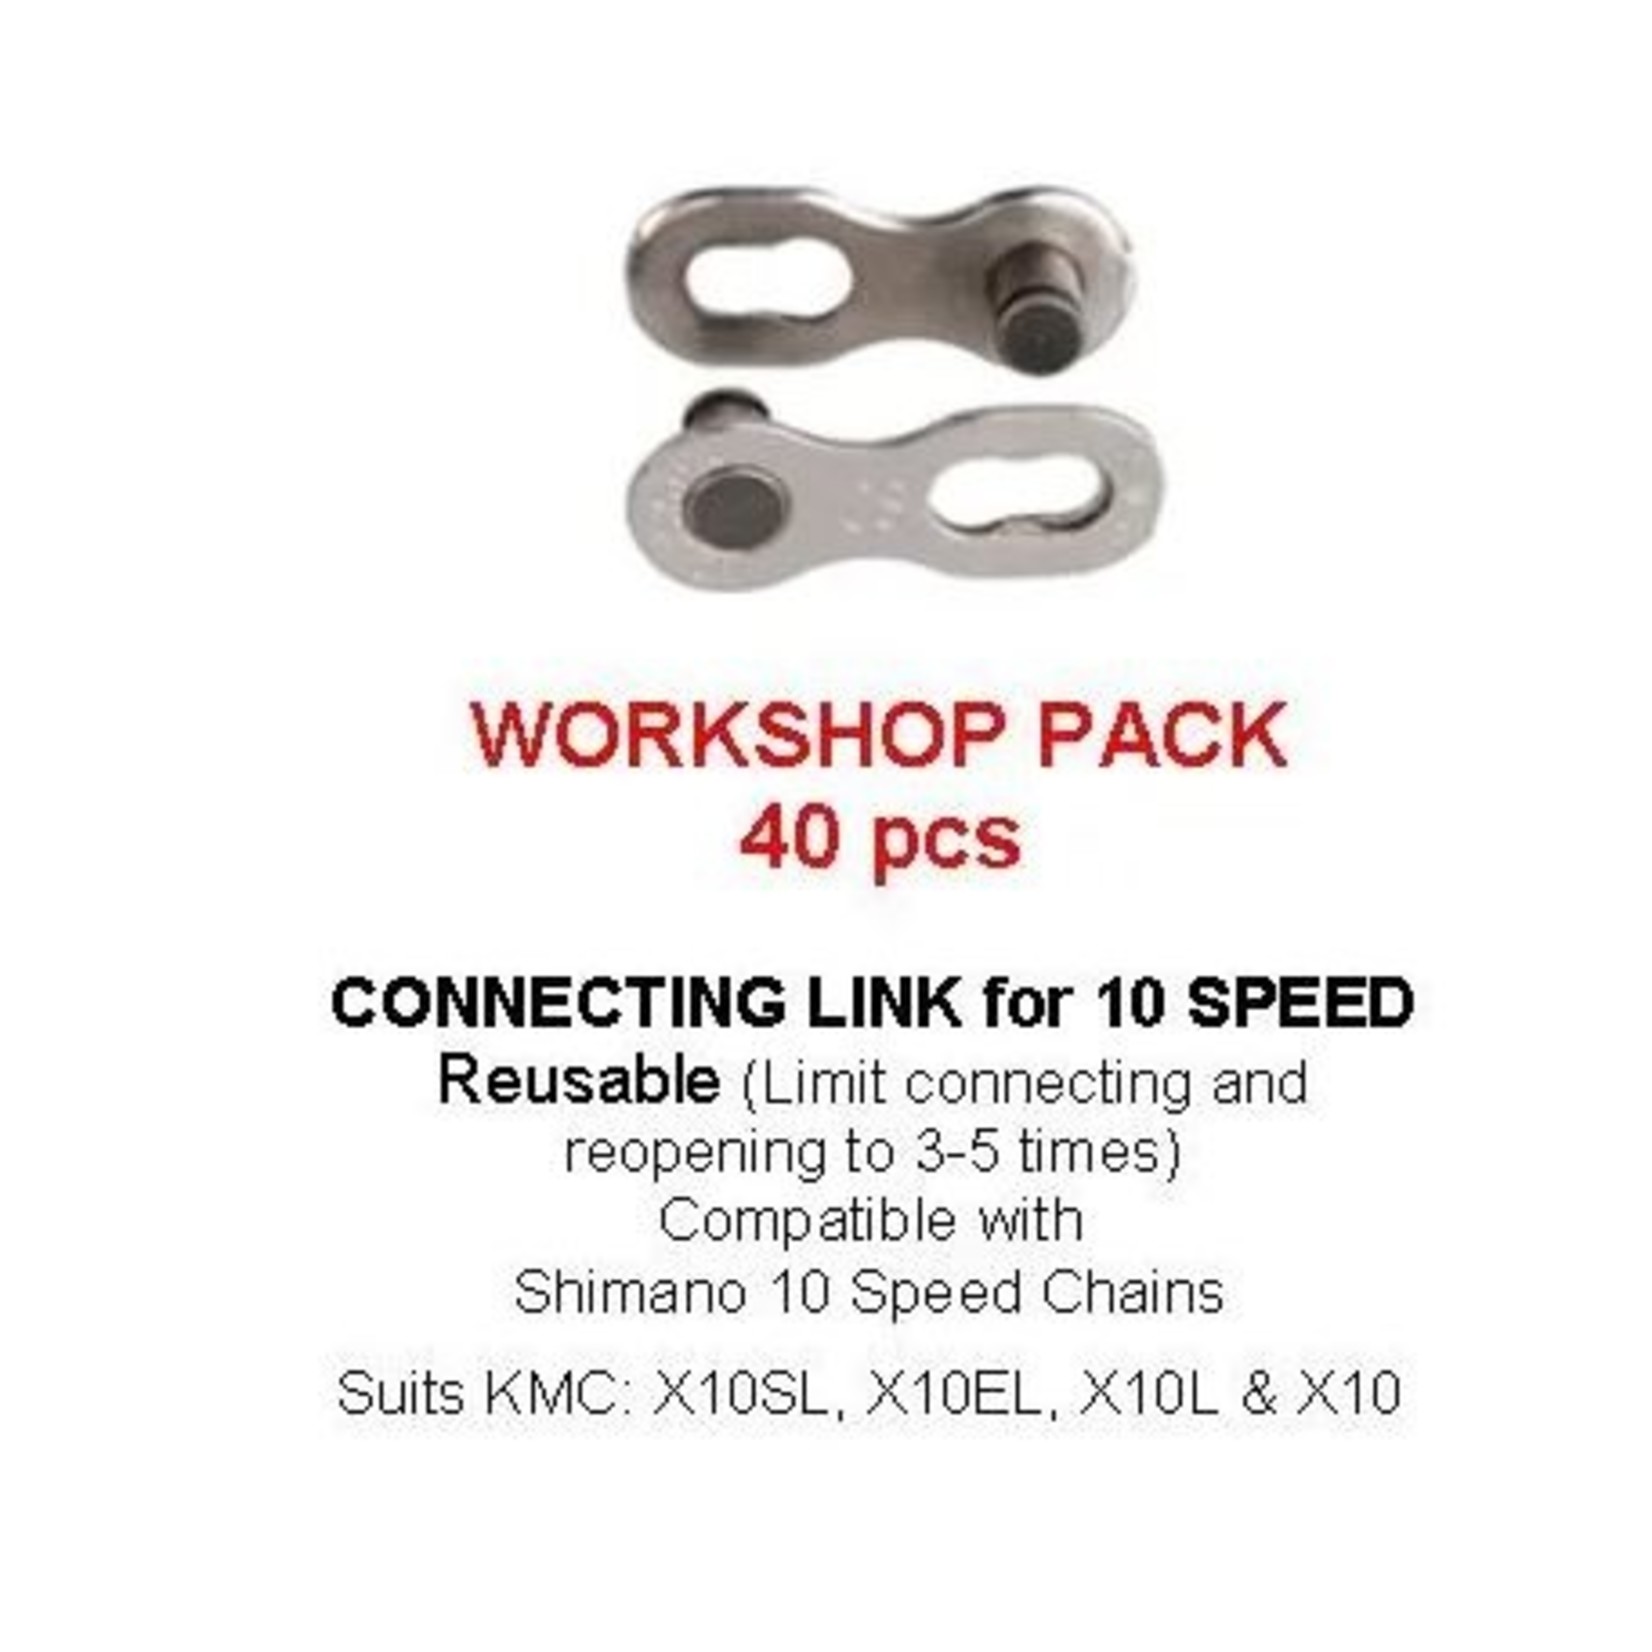 KMC KMC Bike Connecting Chain Links - 10 Speed - Silver - 40 Pcs Workshop